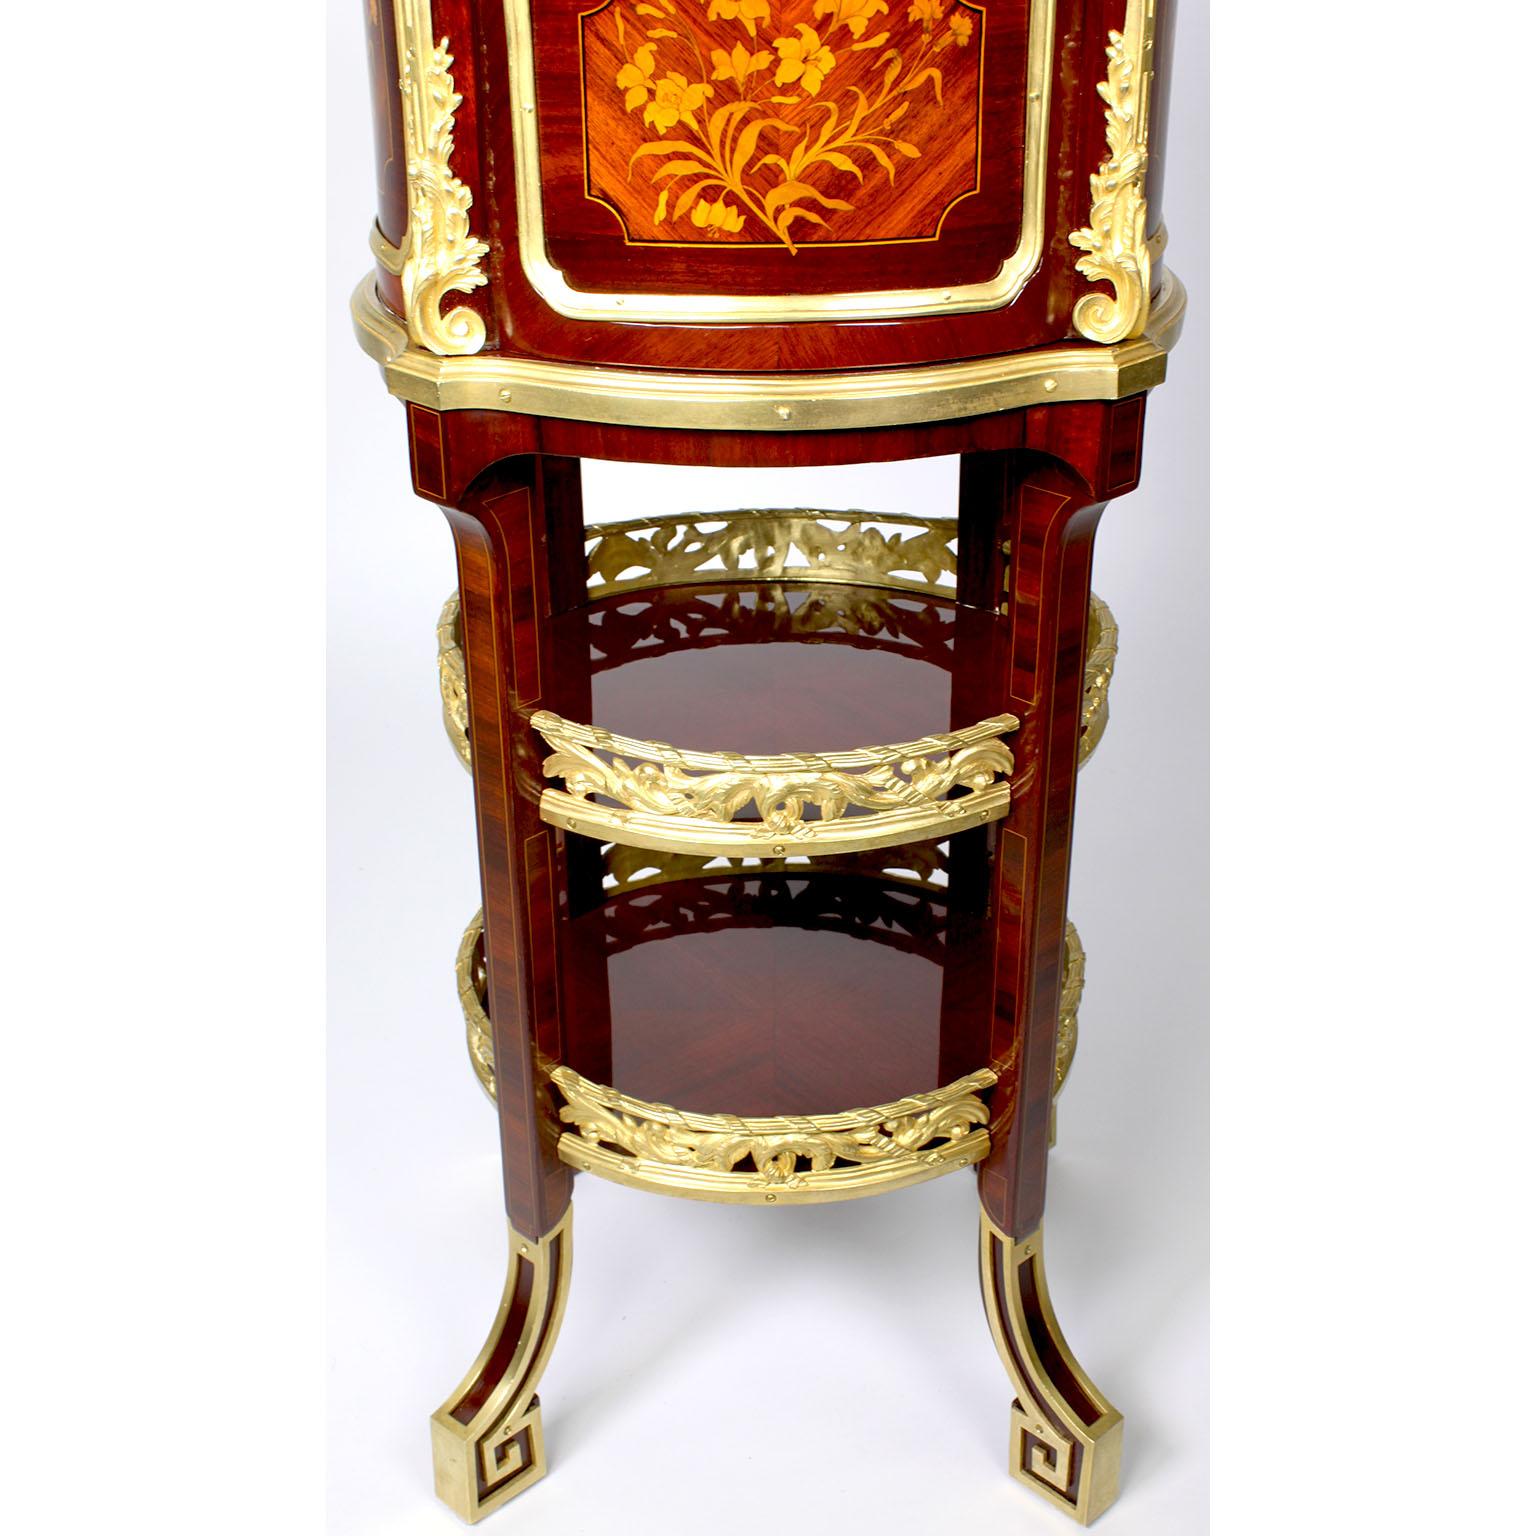 Pr French 19th-20th Century Ormolu Mounted Side-Tables Zwiener-Jansen Successeur For Sale 6